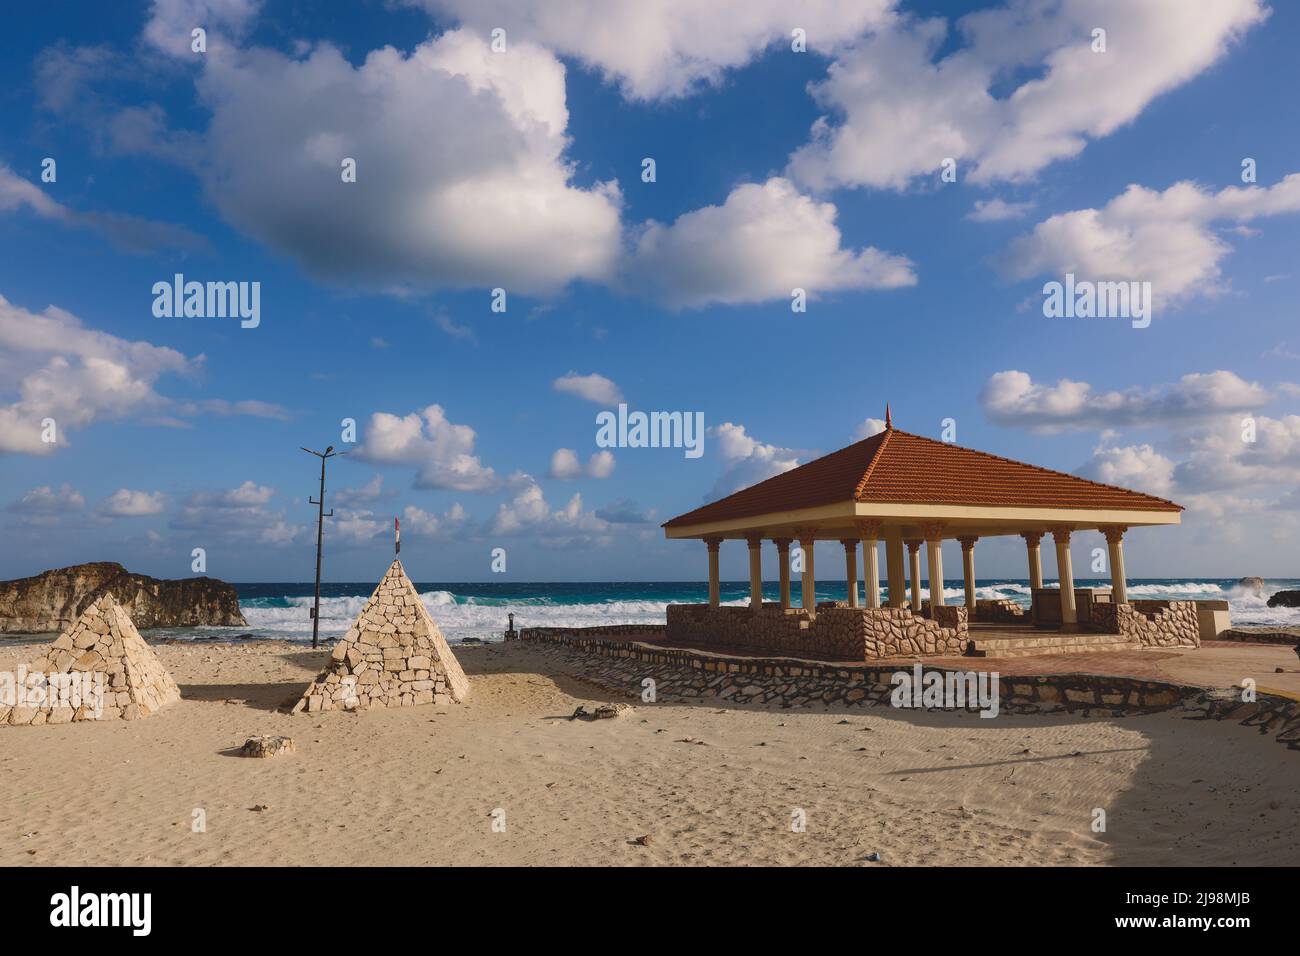 Windy and Rocky Coastline of the Mediterranean Sea in the Marsa Matruh city under Blue Cloudy sky with no People around, Egypt Stock Photo